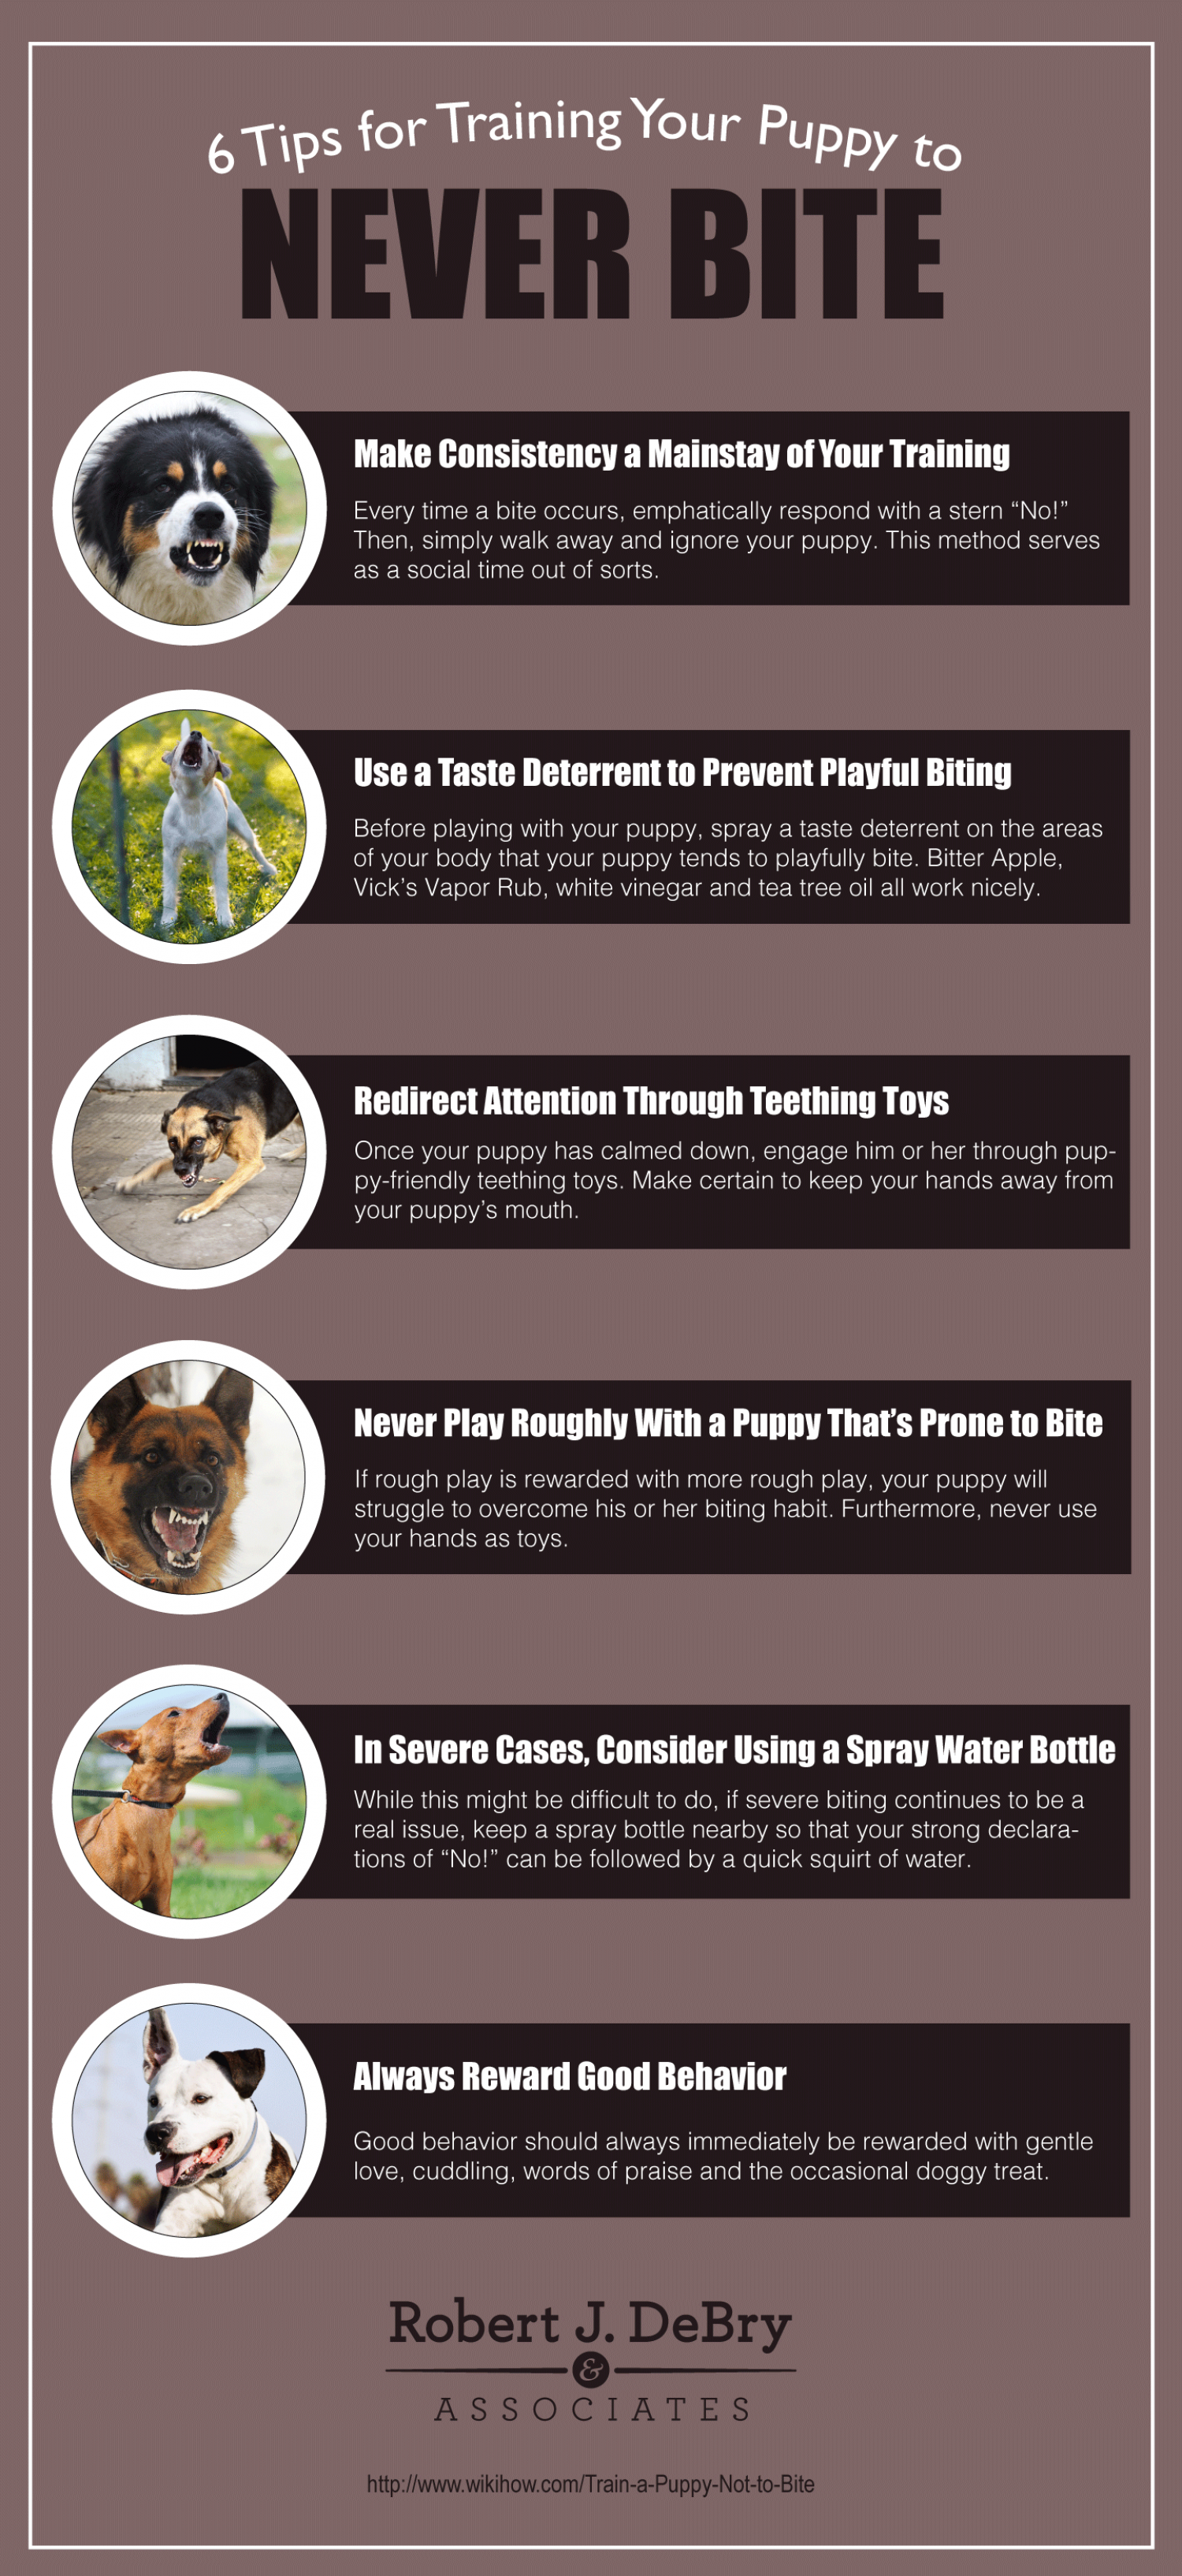 6 Tips for Training Your Puppy to Never Bite Infographic